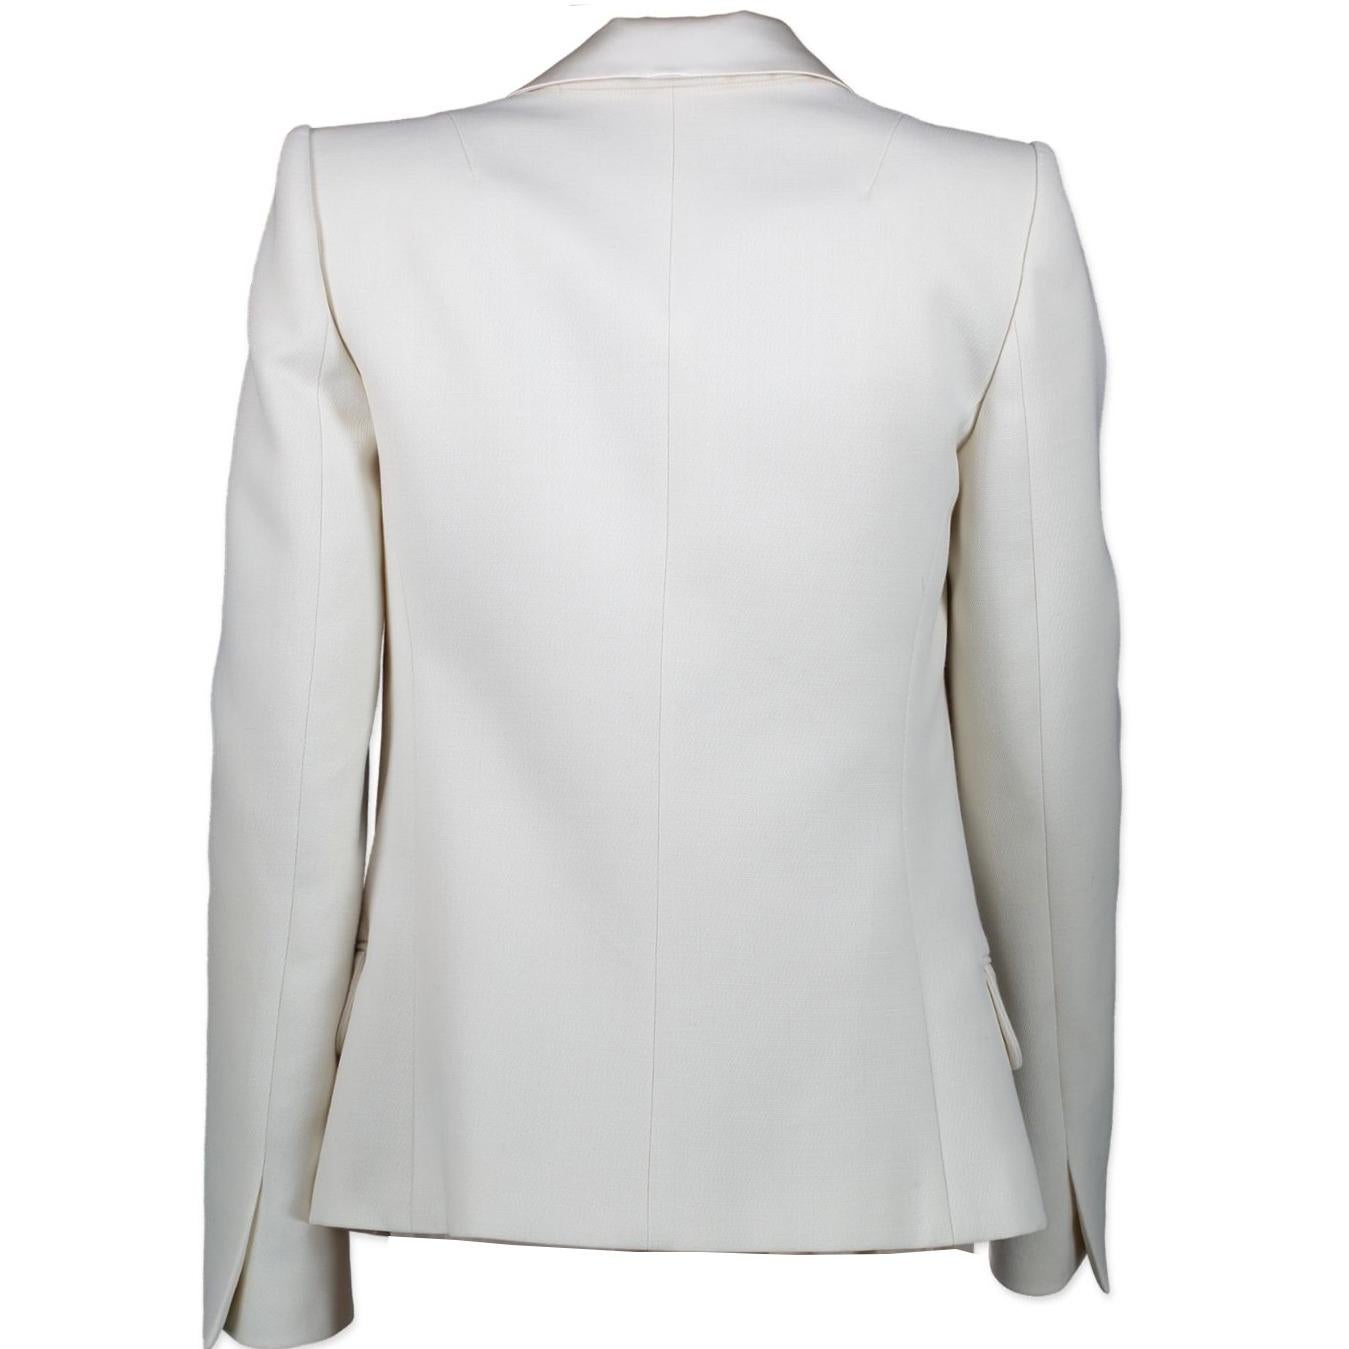 Excellent condition

Balmain White Wool Lapel Blazer - size 34

If you are into classic items with an edge, then you're going to love this Balmain blazer!

The wool cream base of the blazer and the satin lapel work together and create an amazing